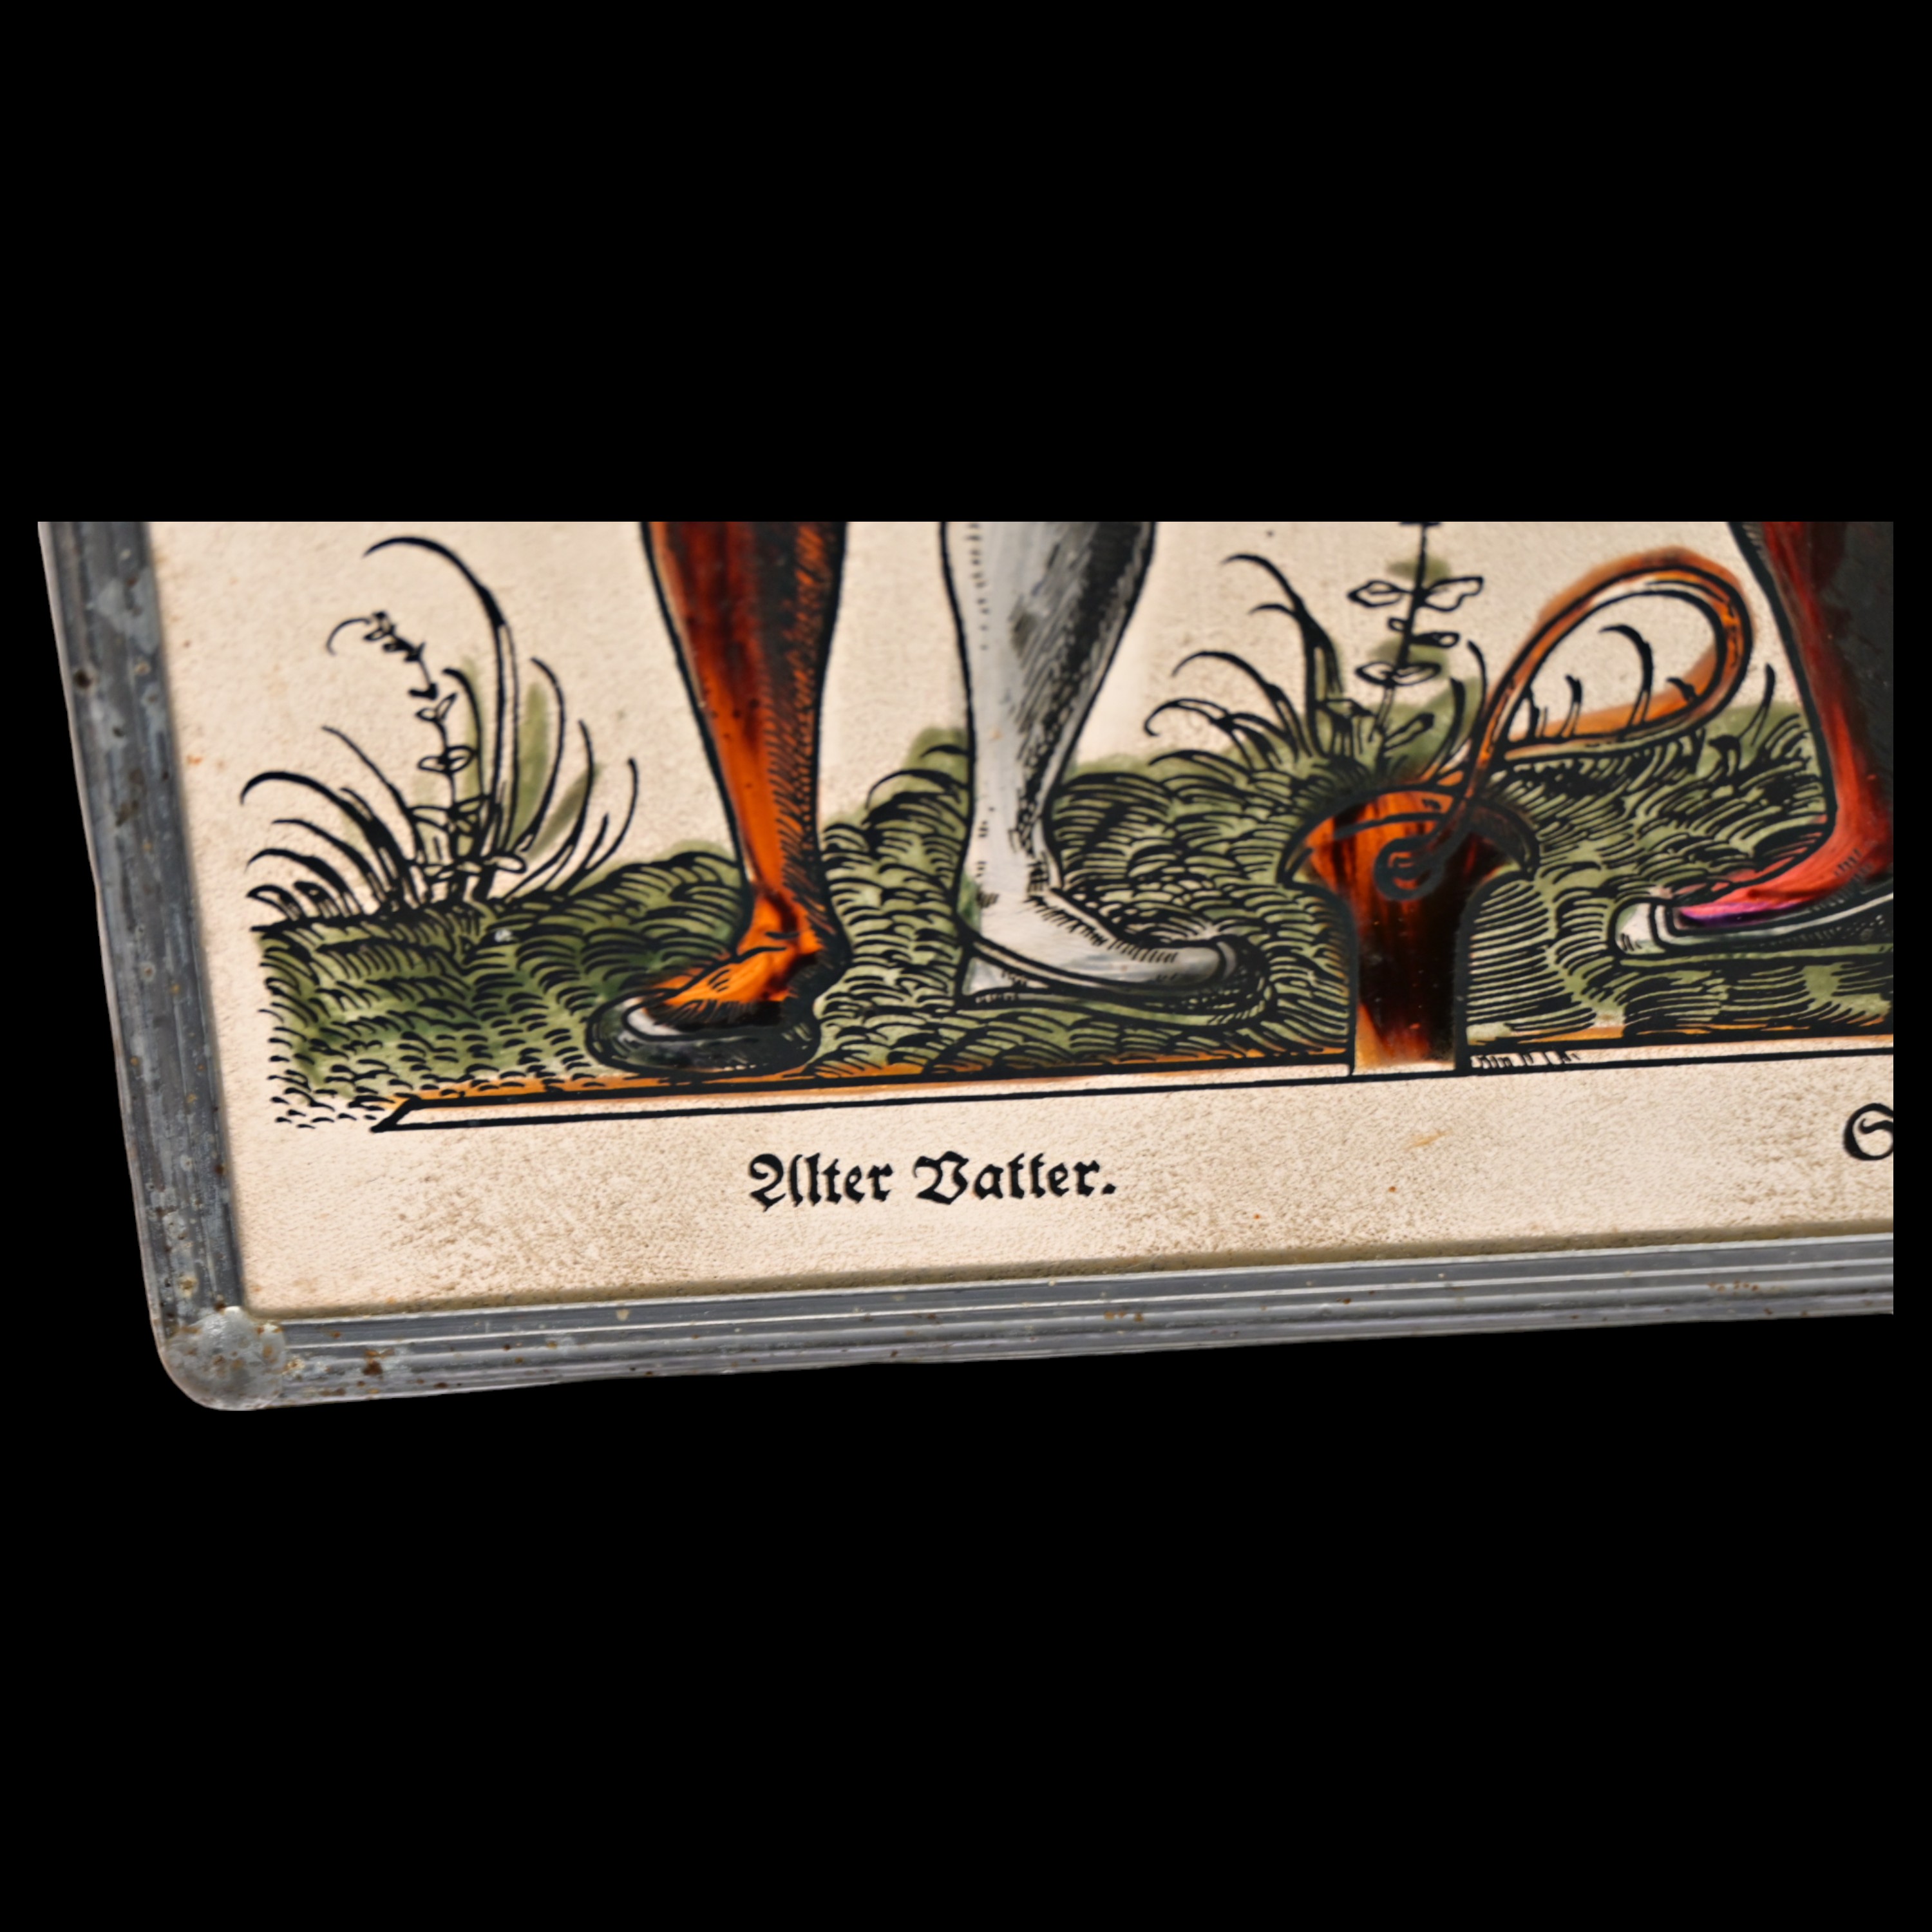 Landsknechts, Painting on glass in the style of 16th century engravings. - Image 7 of 8